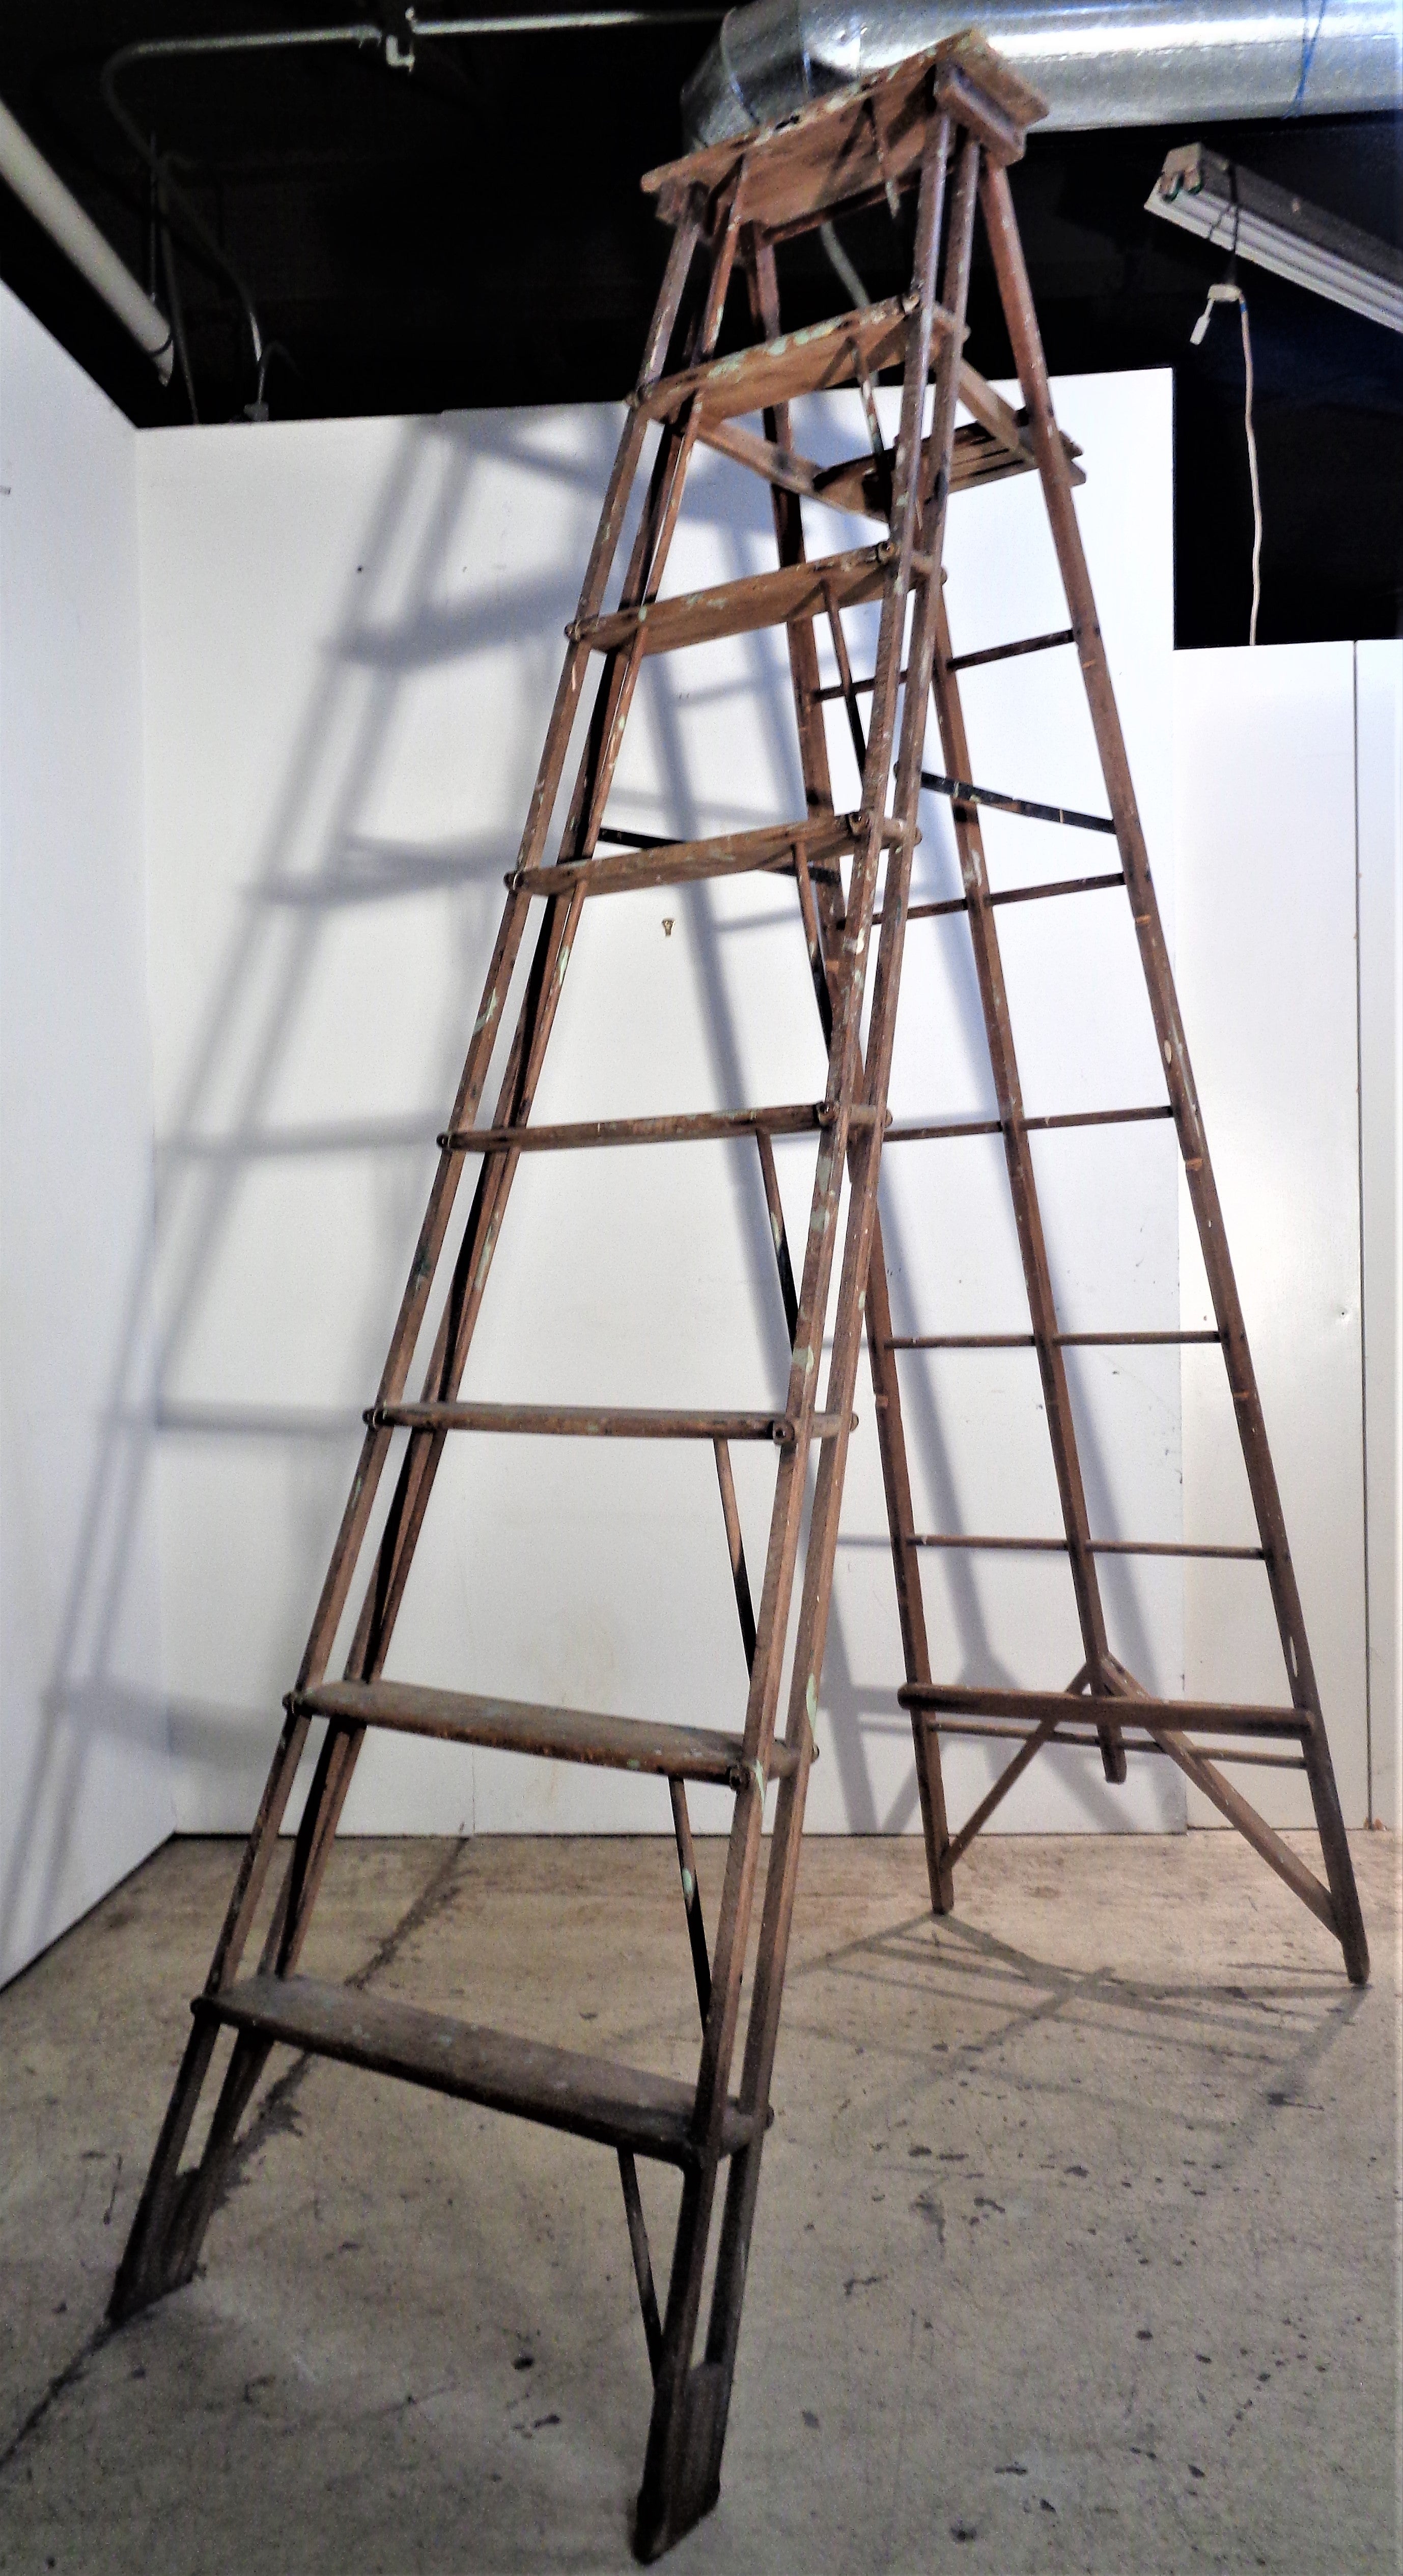 American industrial work ladder with great architectonic form and beautifully aged color to wood and metal fittings. Measures fully extended open as shown in pictures - 90